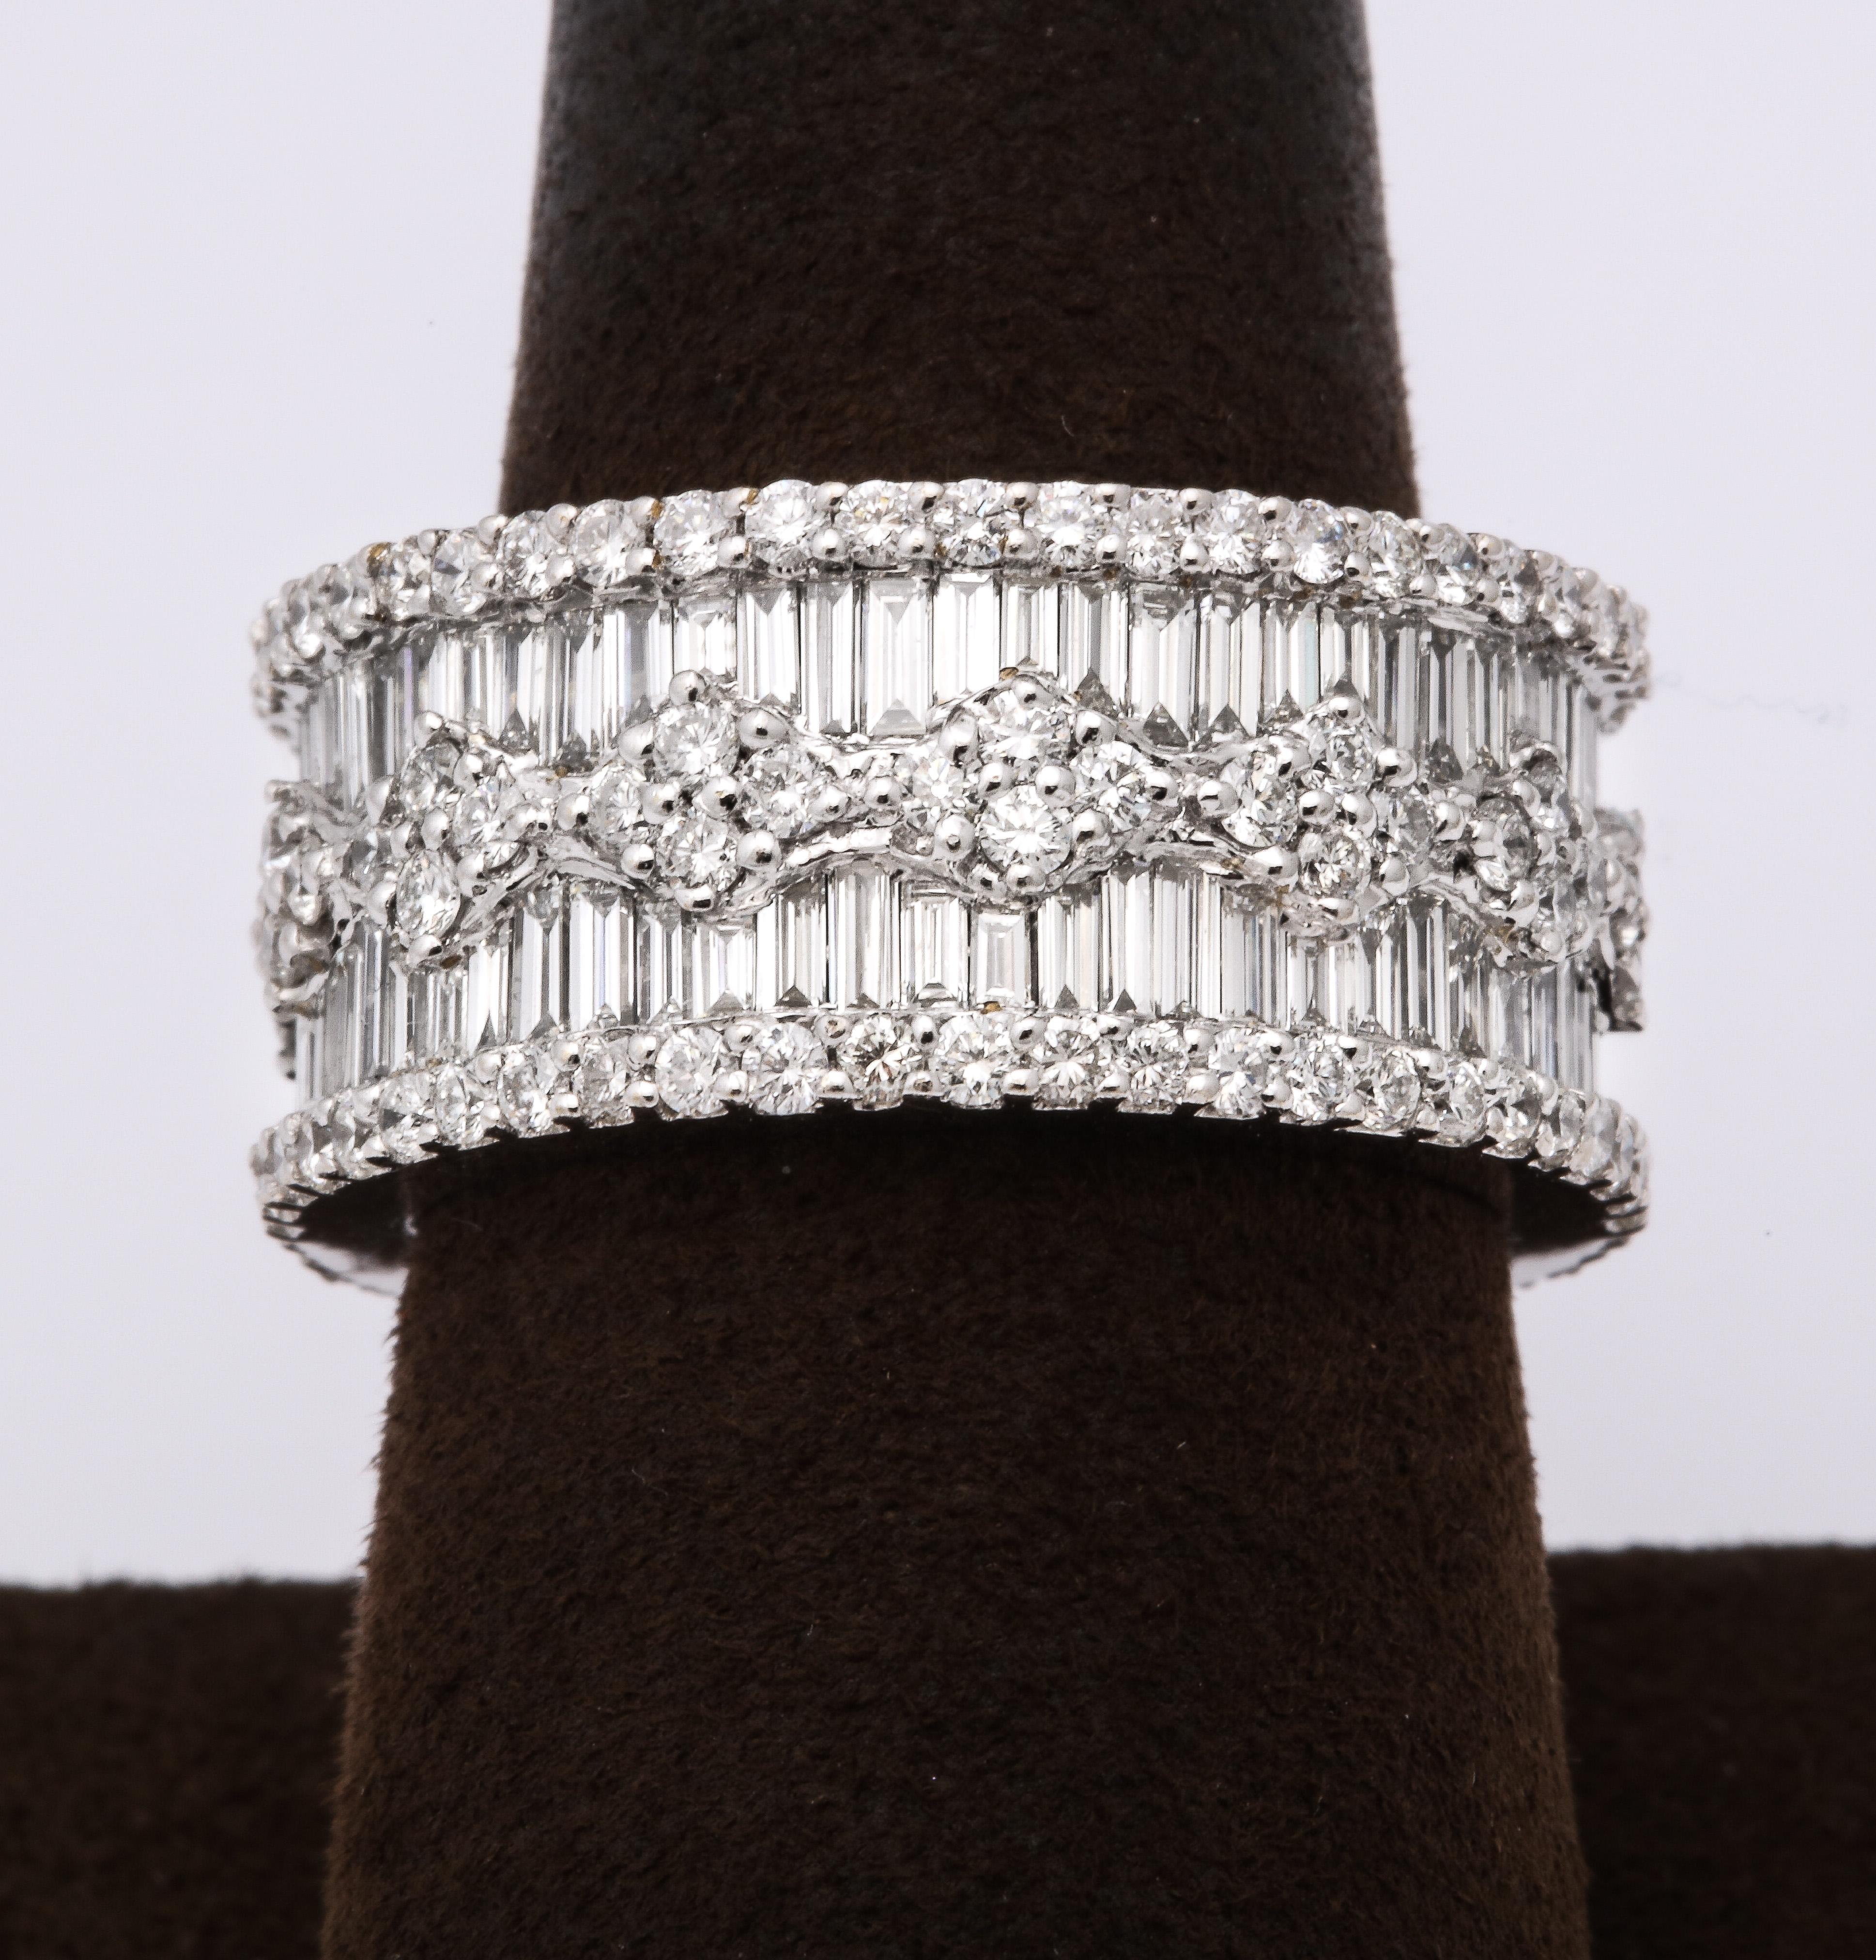 
5.31 carats of white round brilliant cut and baguette diamonds set in 18k white gold.

10.5 mm wide

Size 6.75 -- the size is slightly adjustable.  